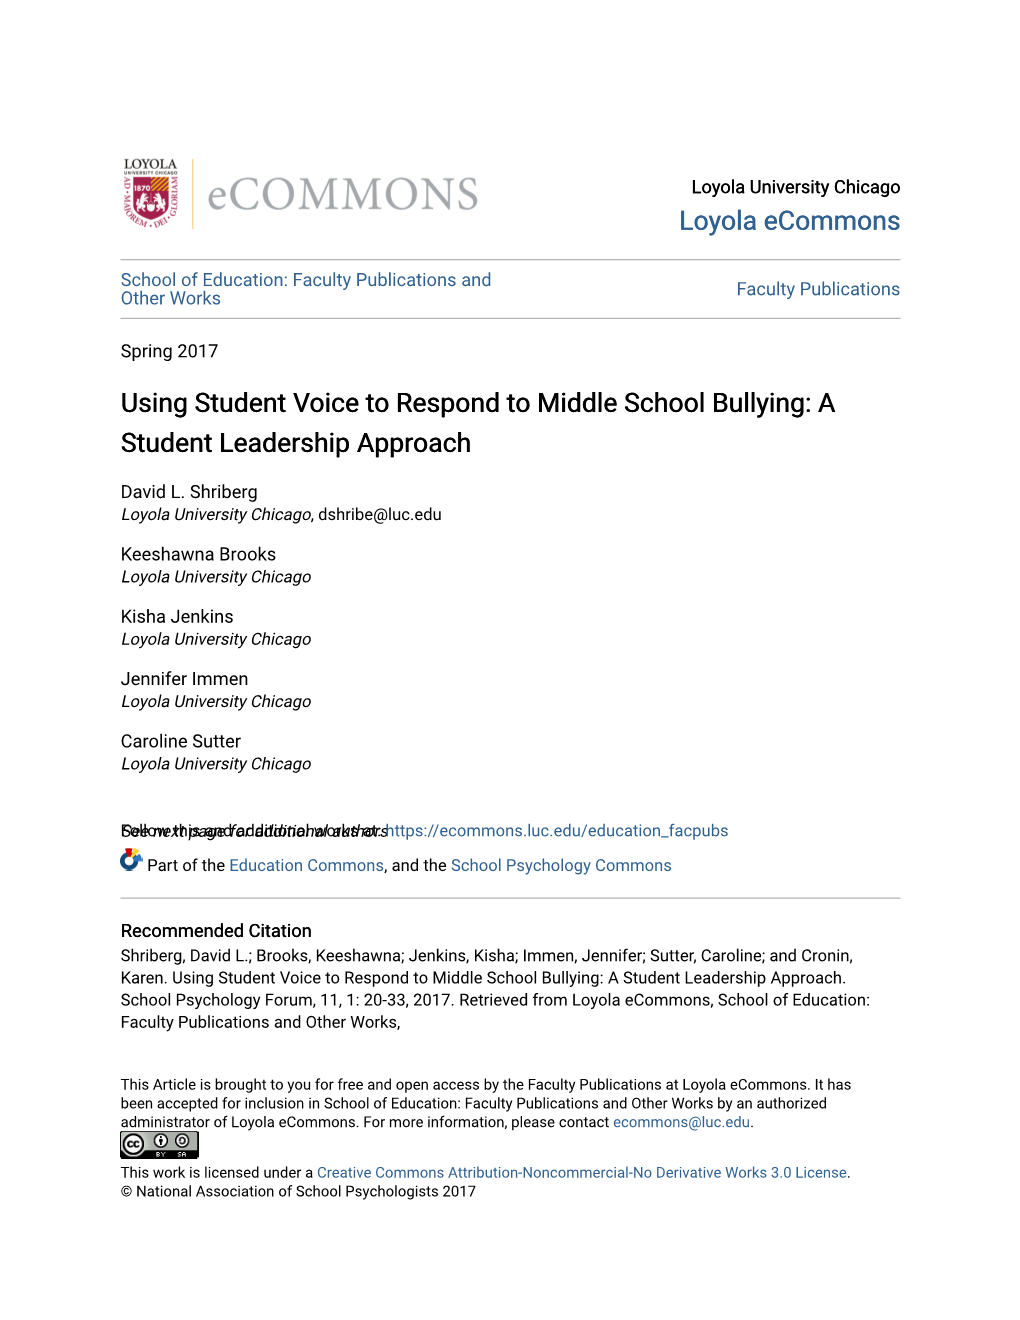 Using Student Voice to Respond to Middle School Bullying: a Student Leadership Approach